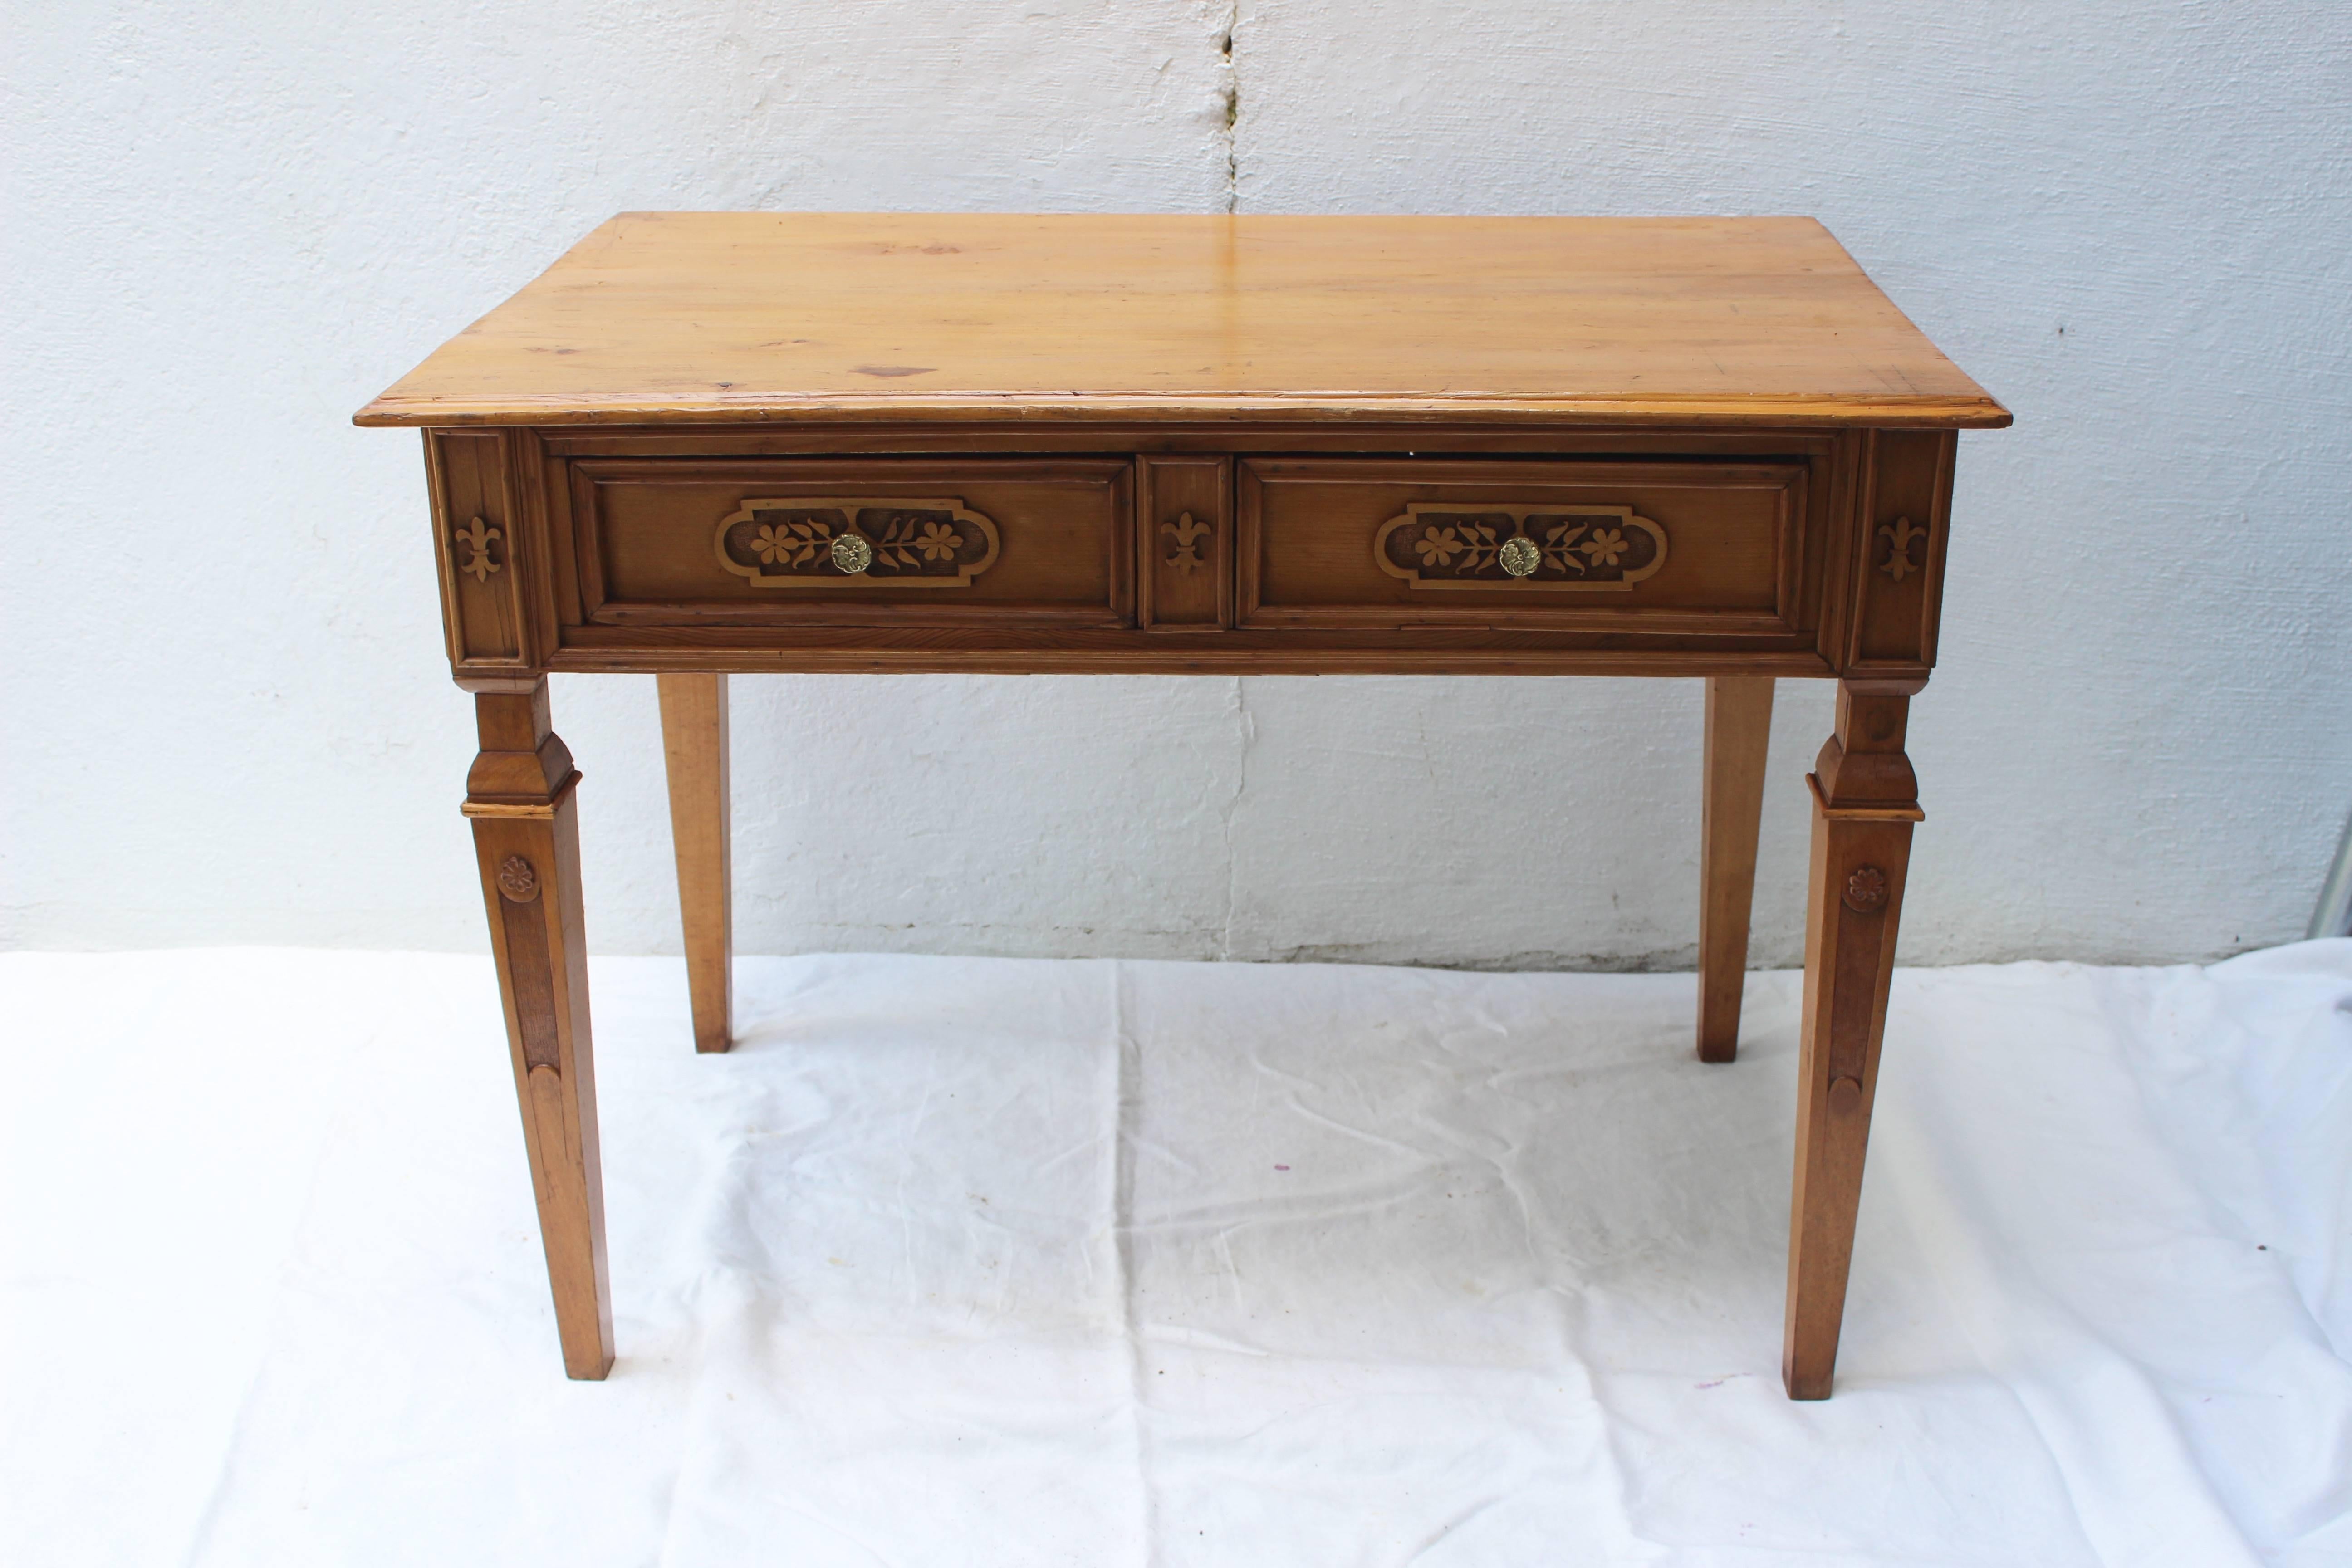 Two-part northern European pine desk with two upper cabinets with carved cornice and panelled door resting on a desk with two drawers all supported on tapered legs, circa 1900.

The table is 29.25